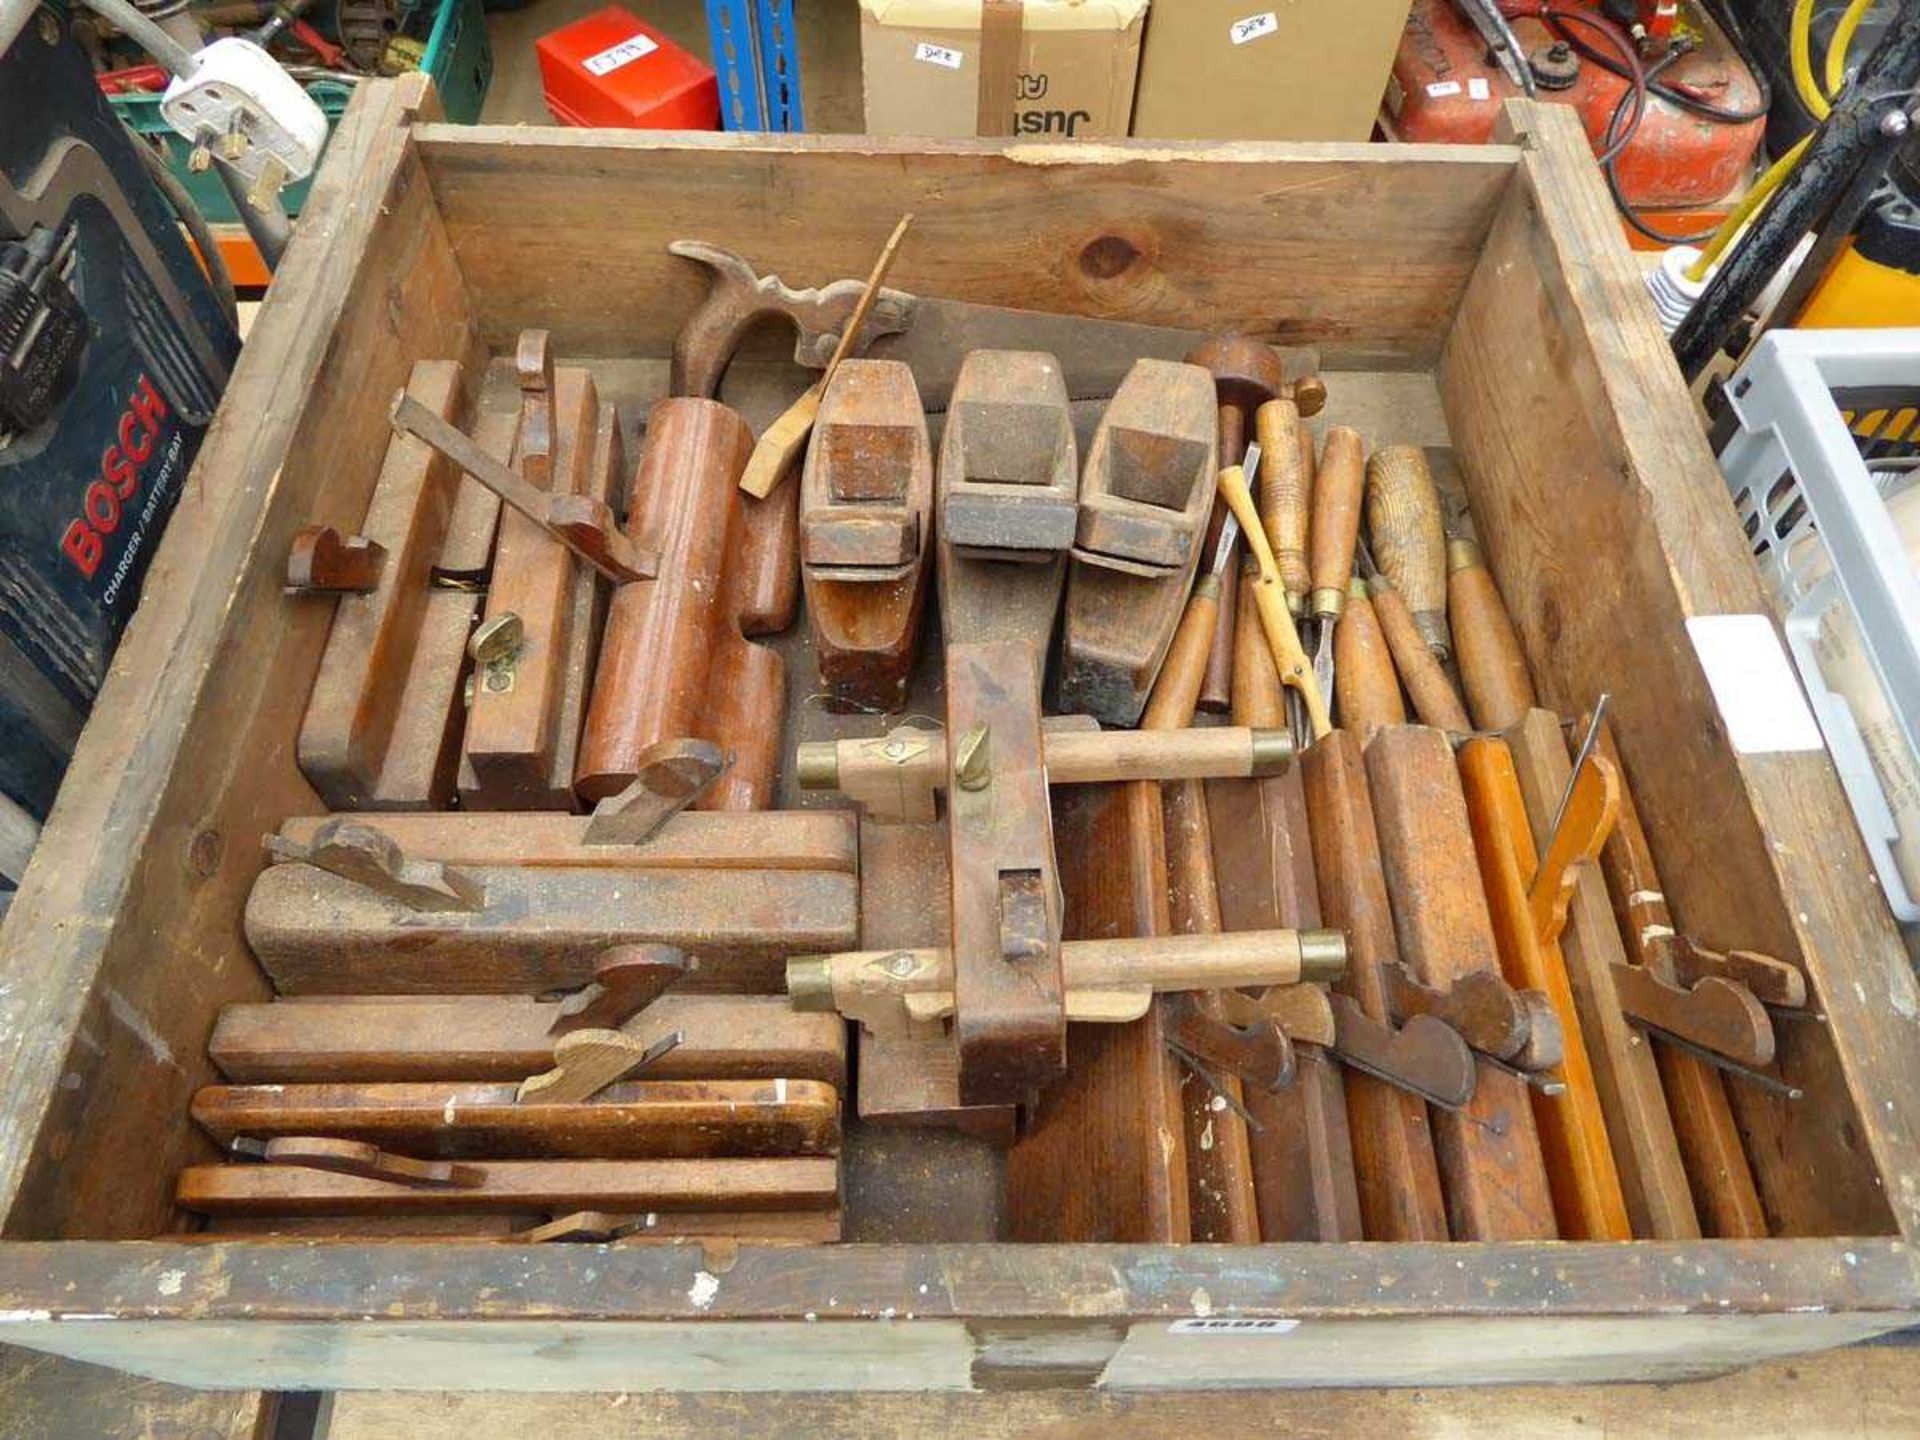 Wooden drawer of vintage wooden planes and chisels